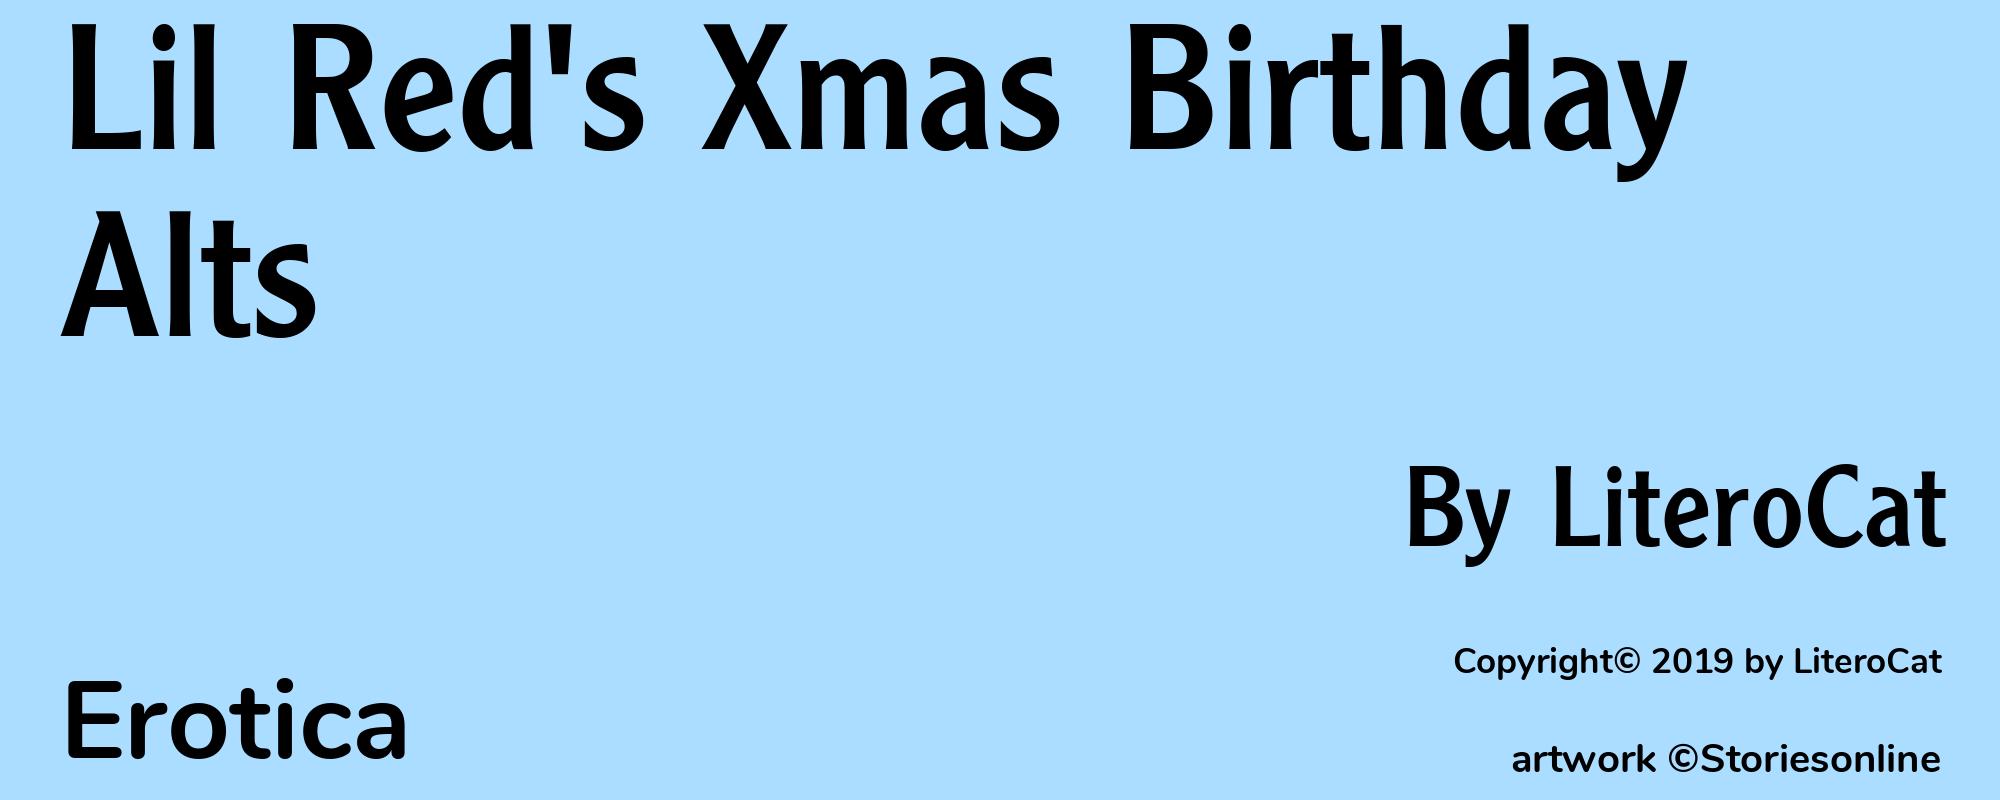 Lil Red's Xmas Birthday Alts - Cover